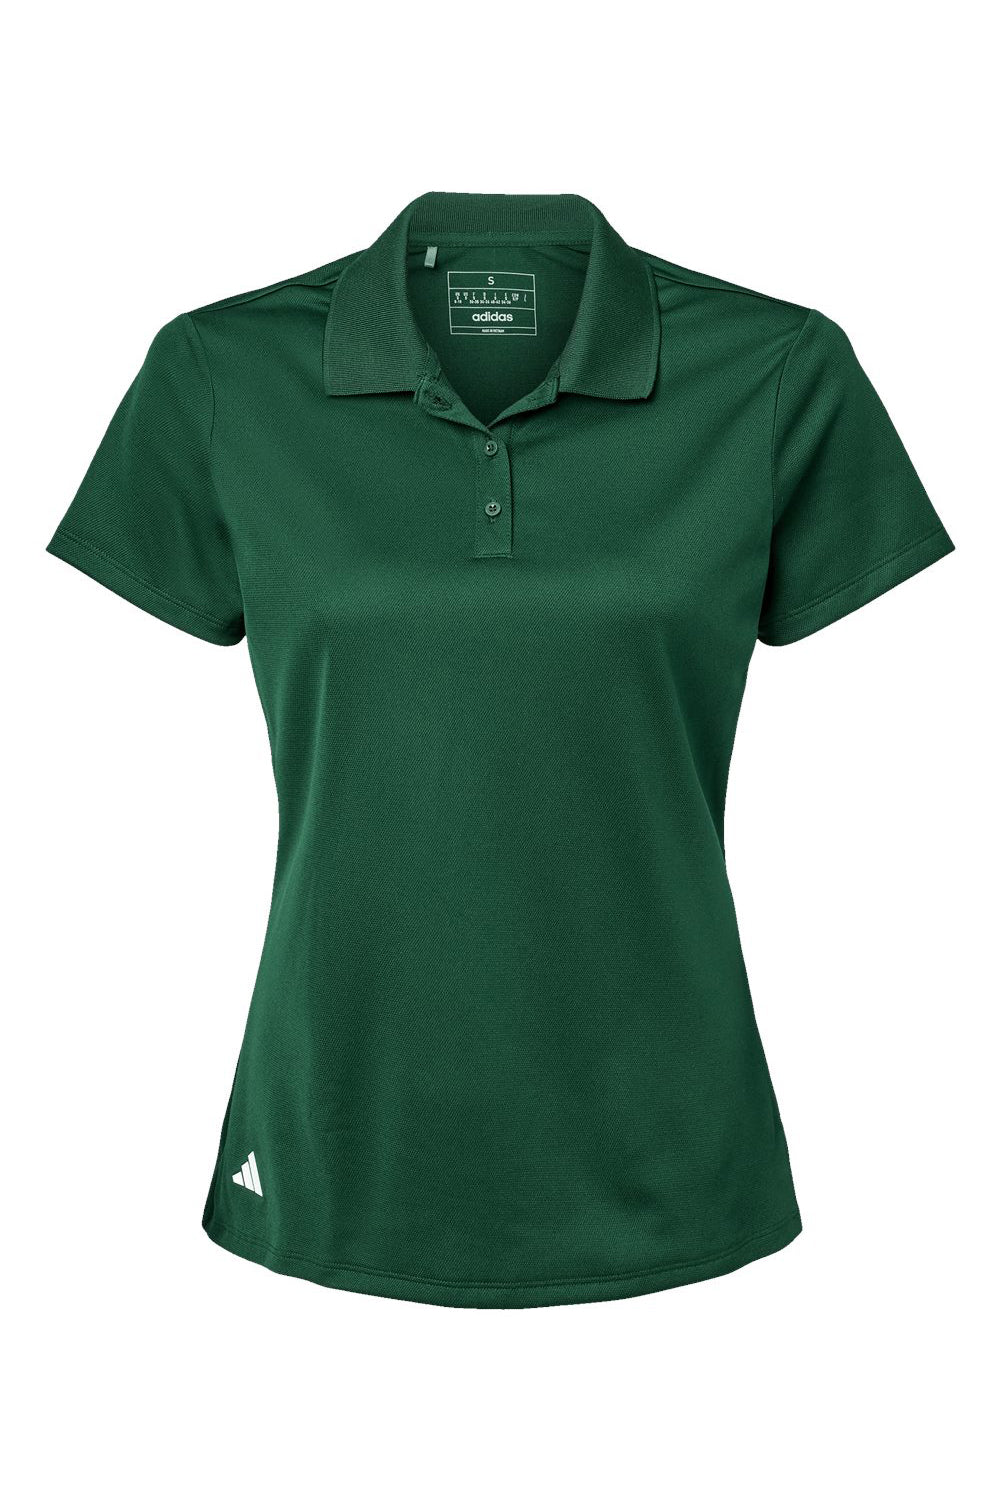 Adidas A431 Womens UV Protection Short Sleeve Polo Shirt Collegiate Green Flat Front